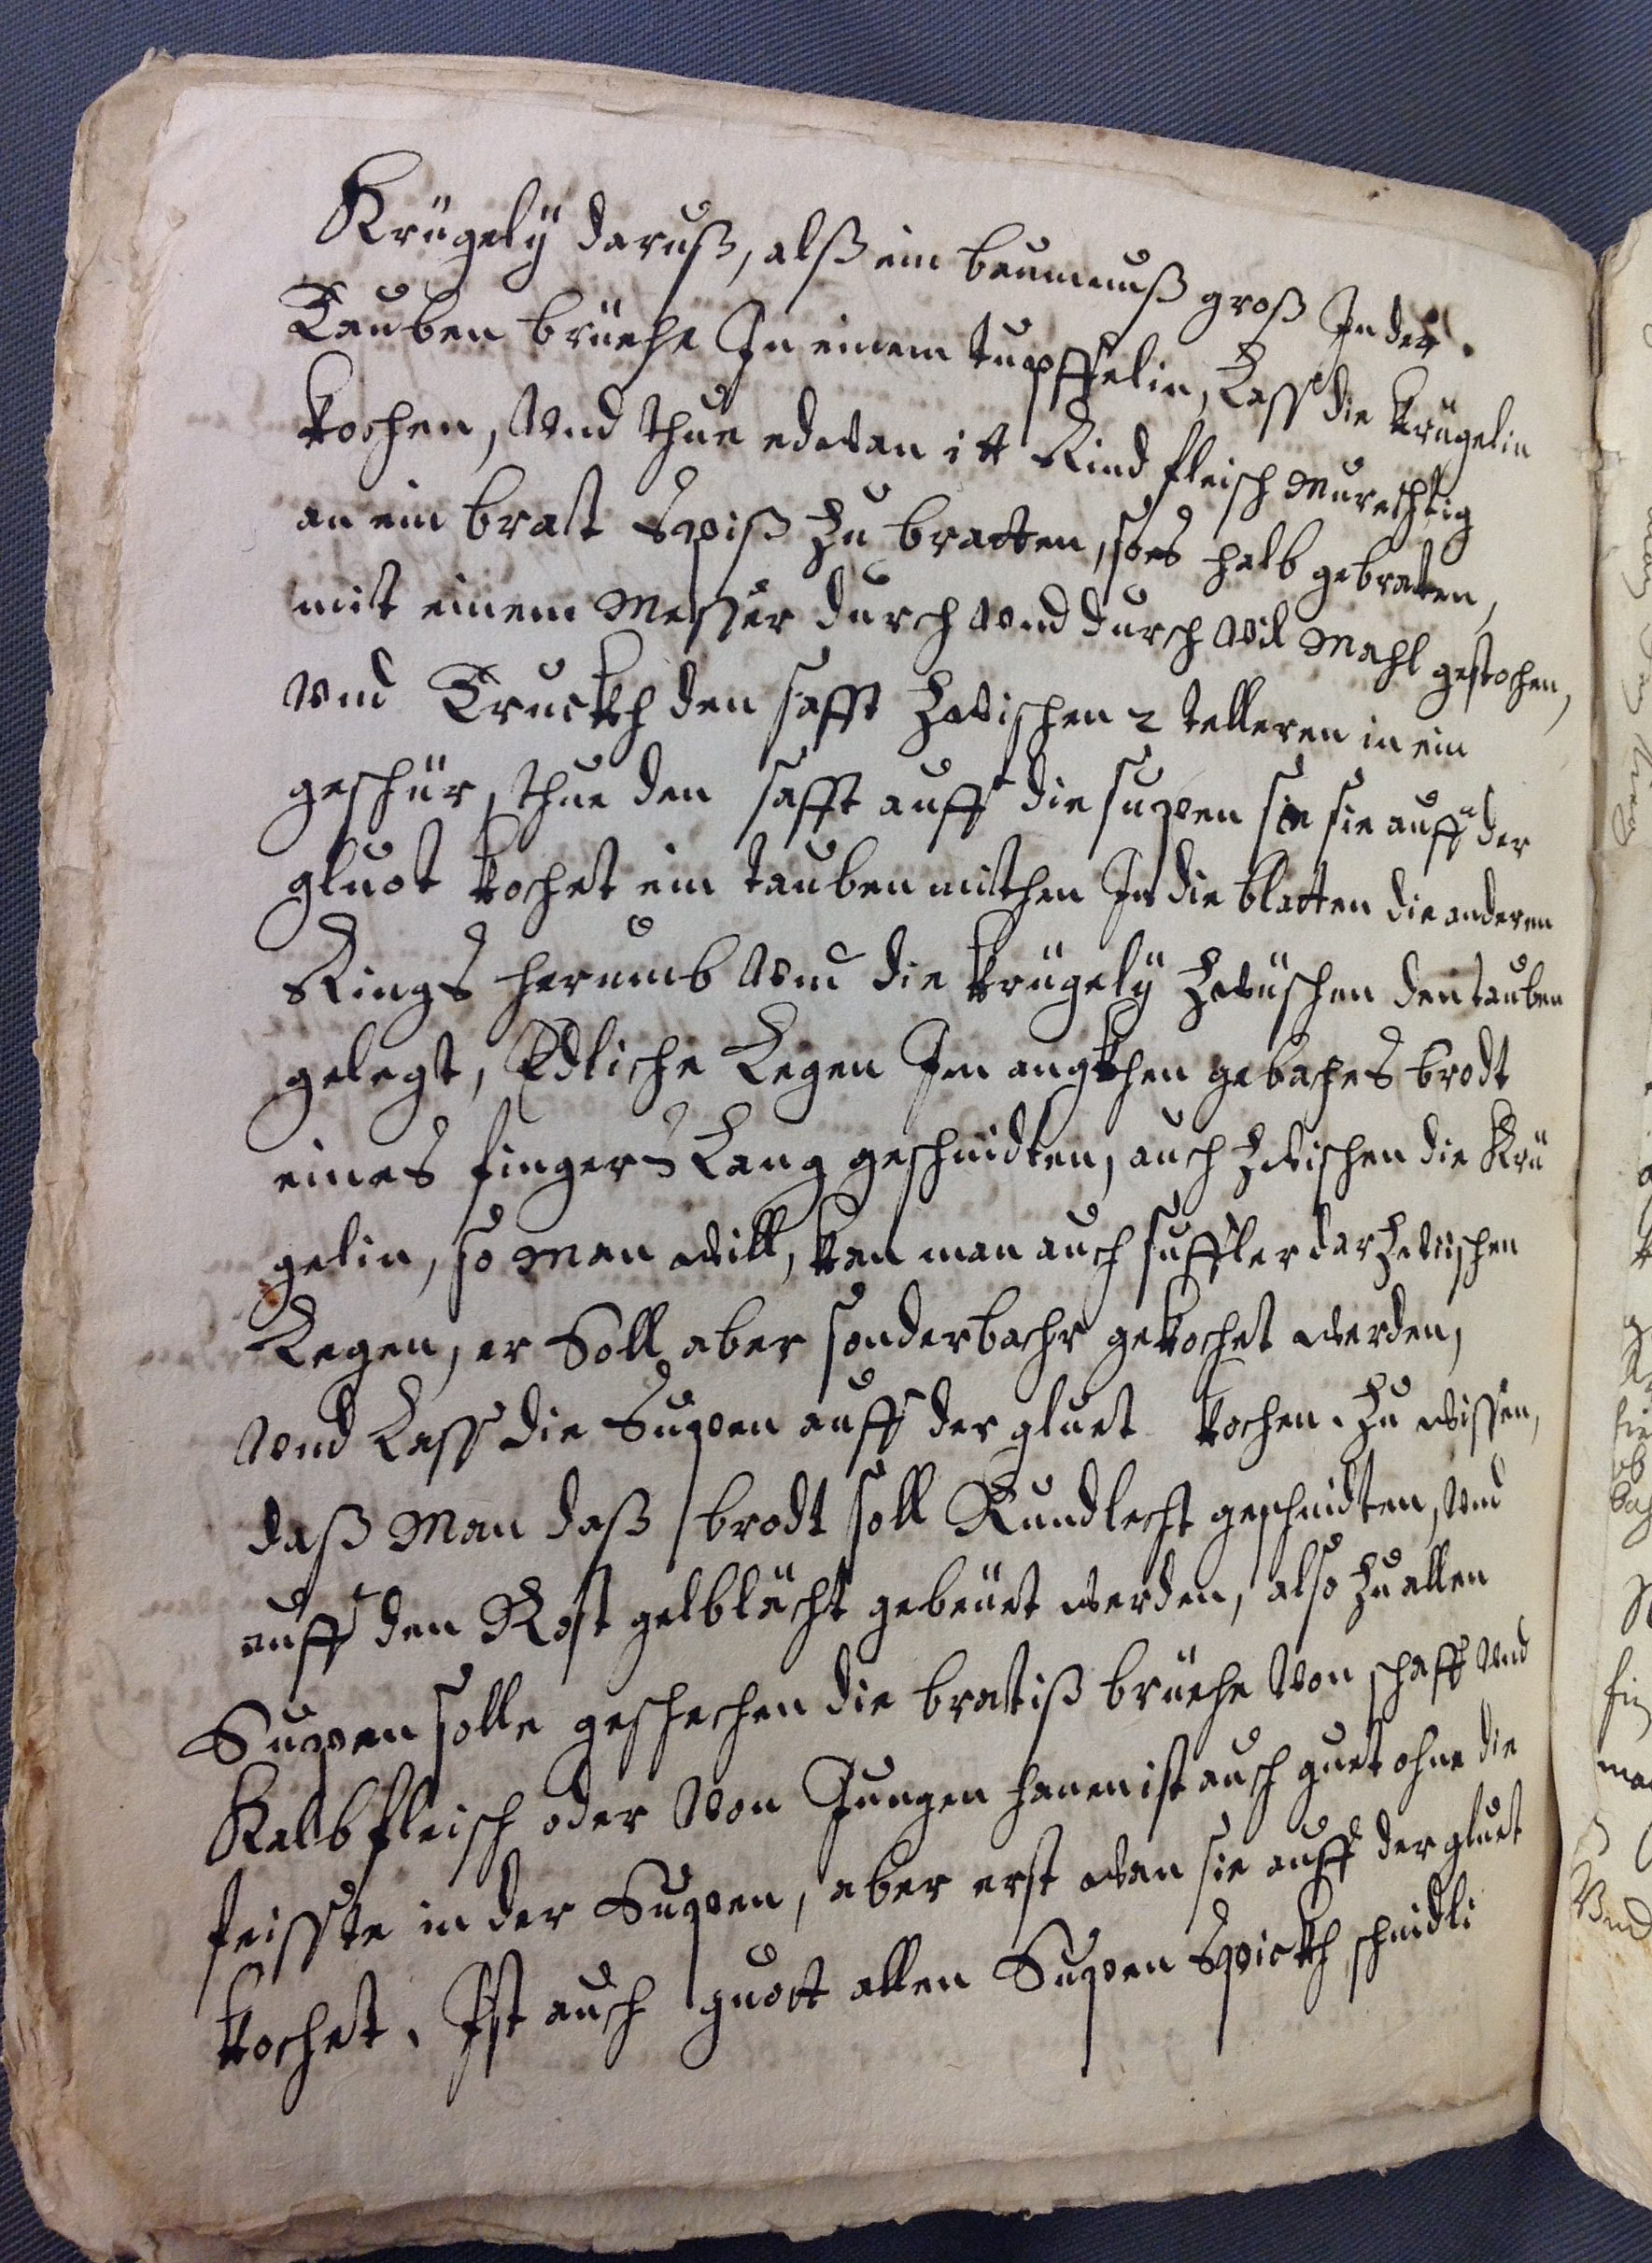 An example of a page in the recipe book